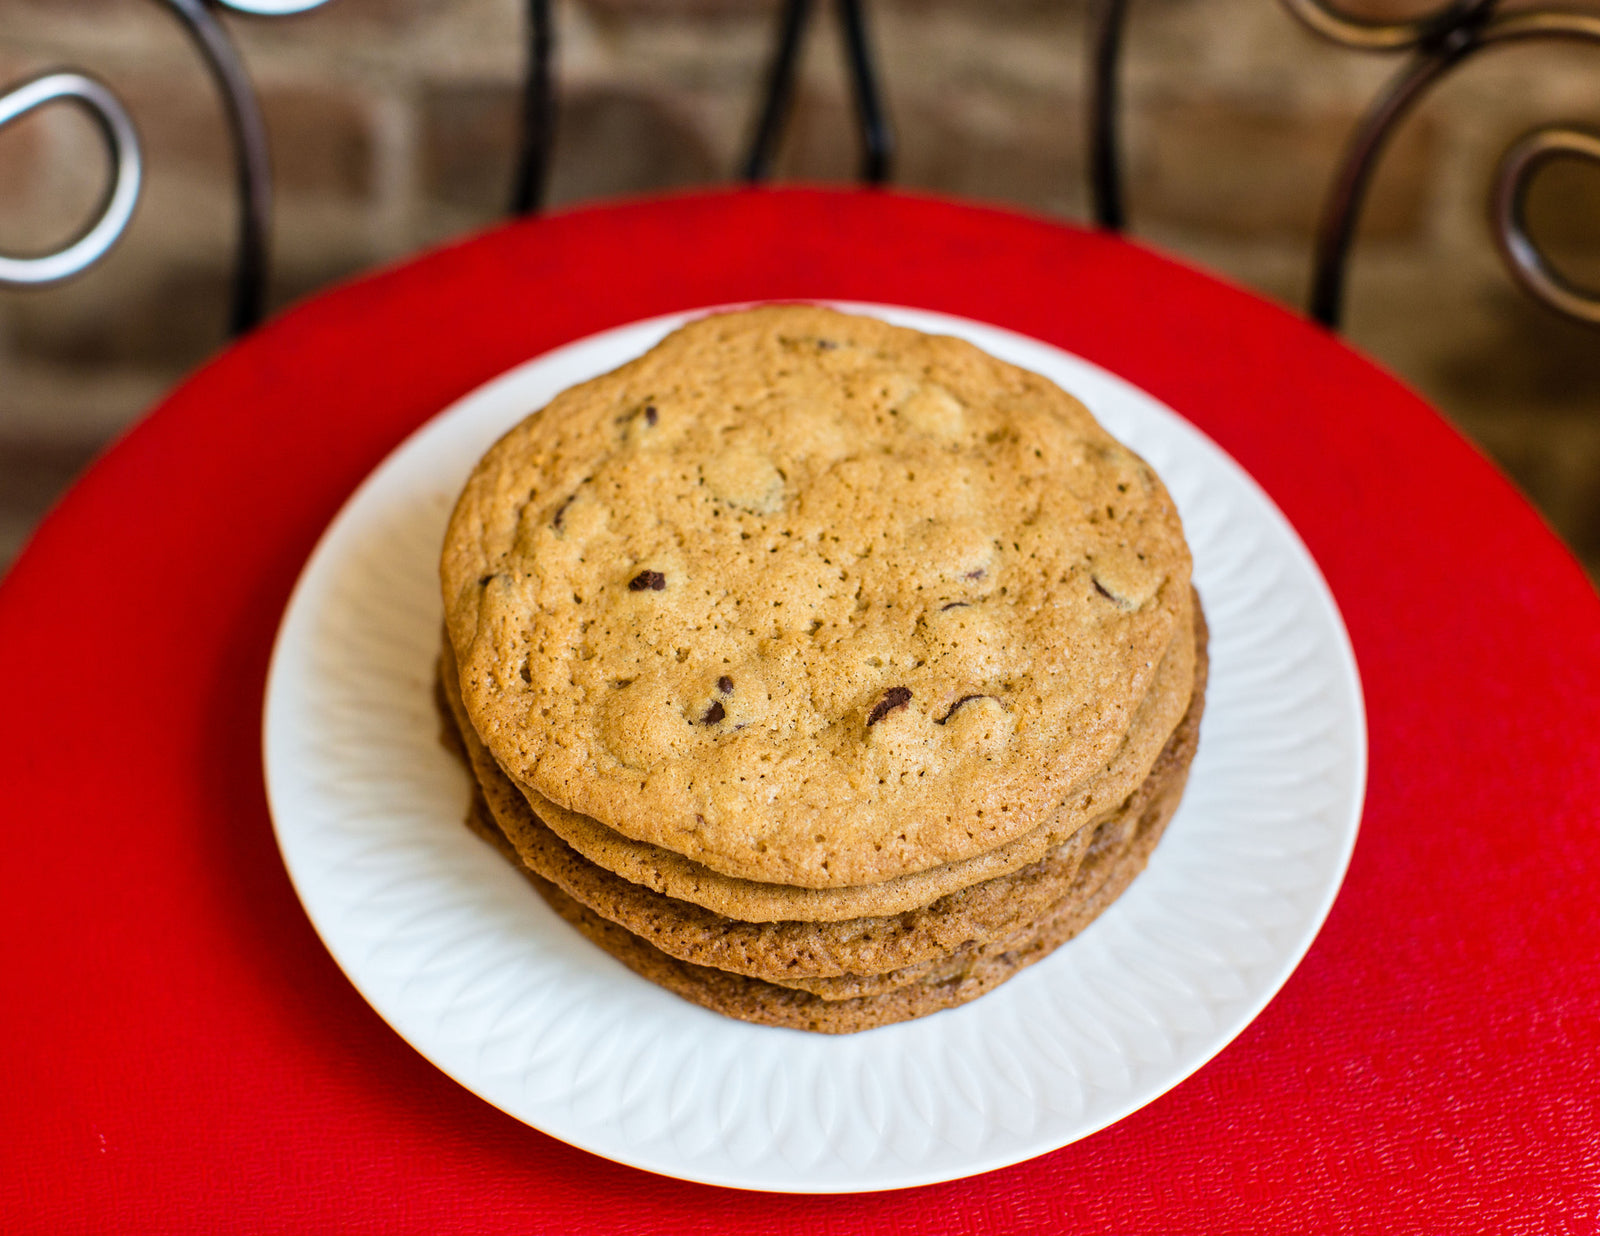 Large Chocolate Chip Cookies